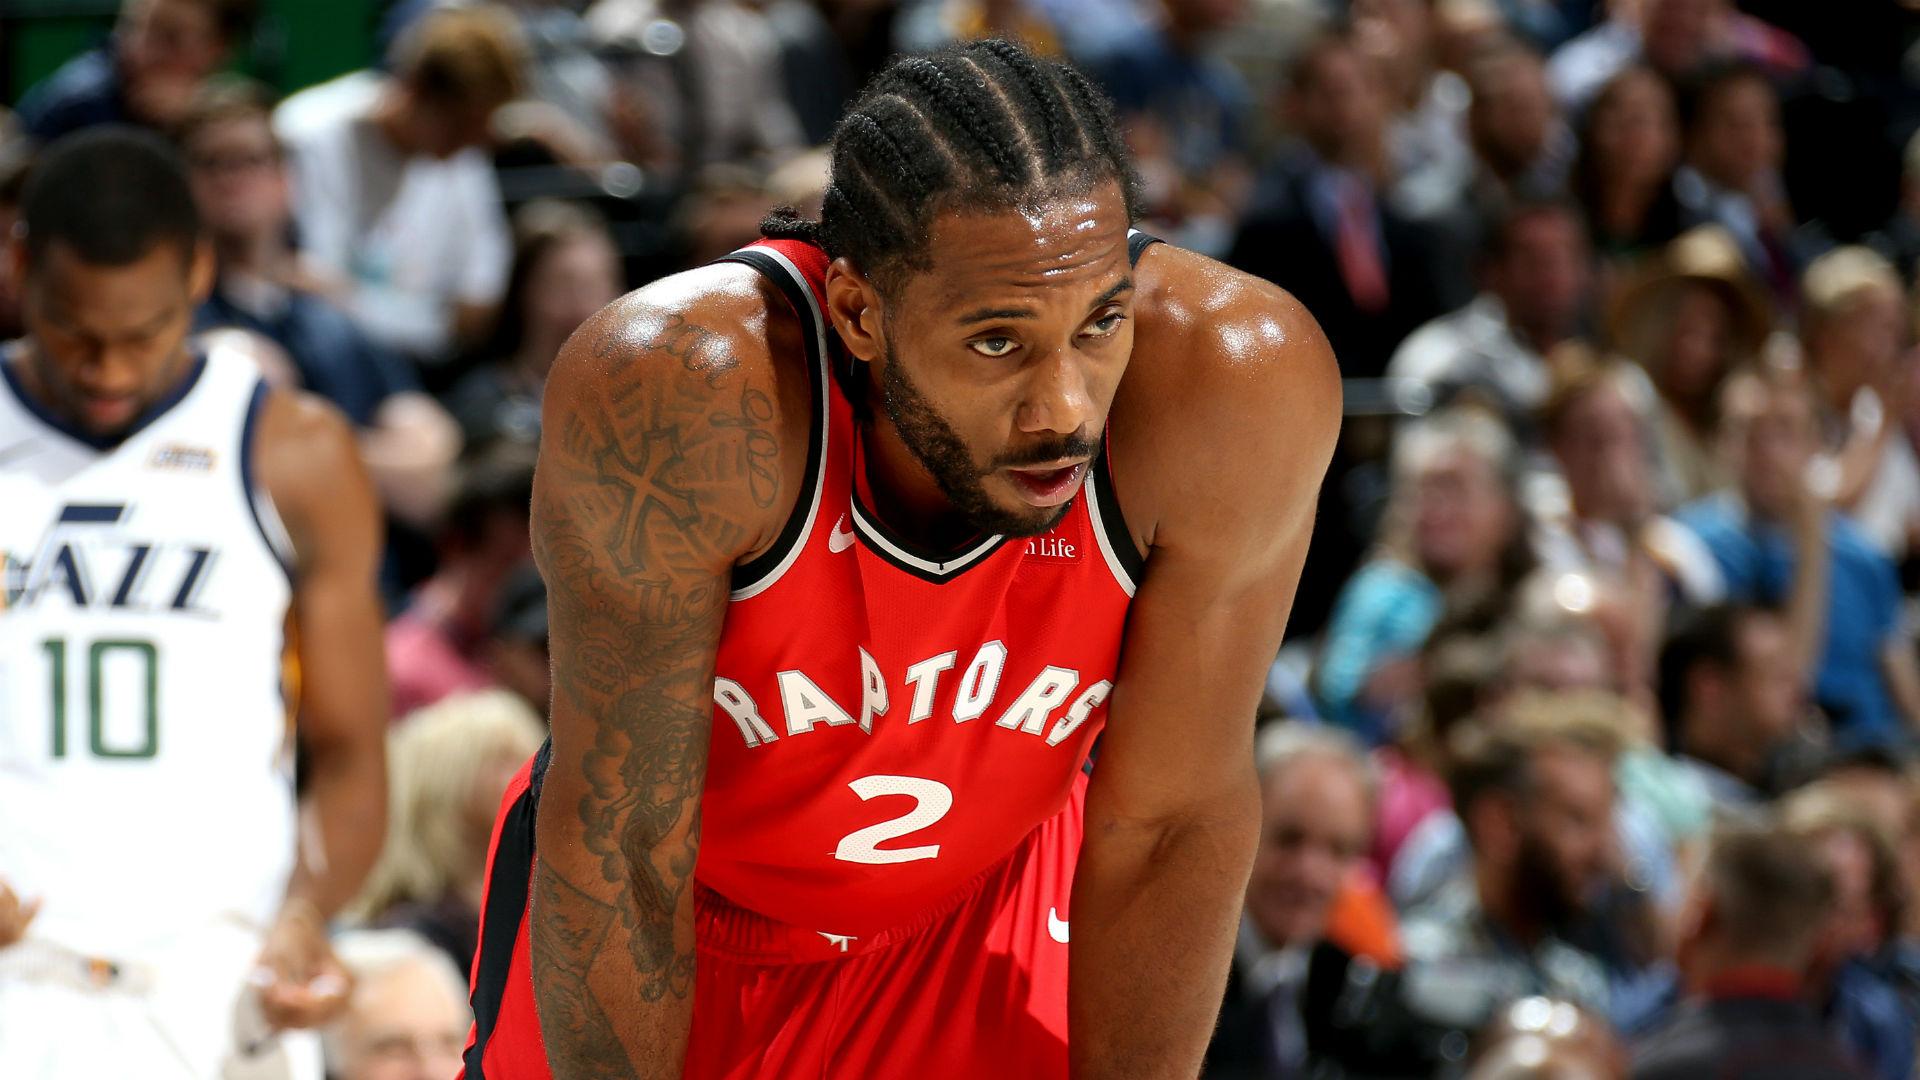 Five takeaways from Kawhi Leonard's second game with the Toronto